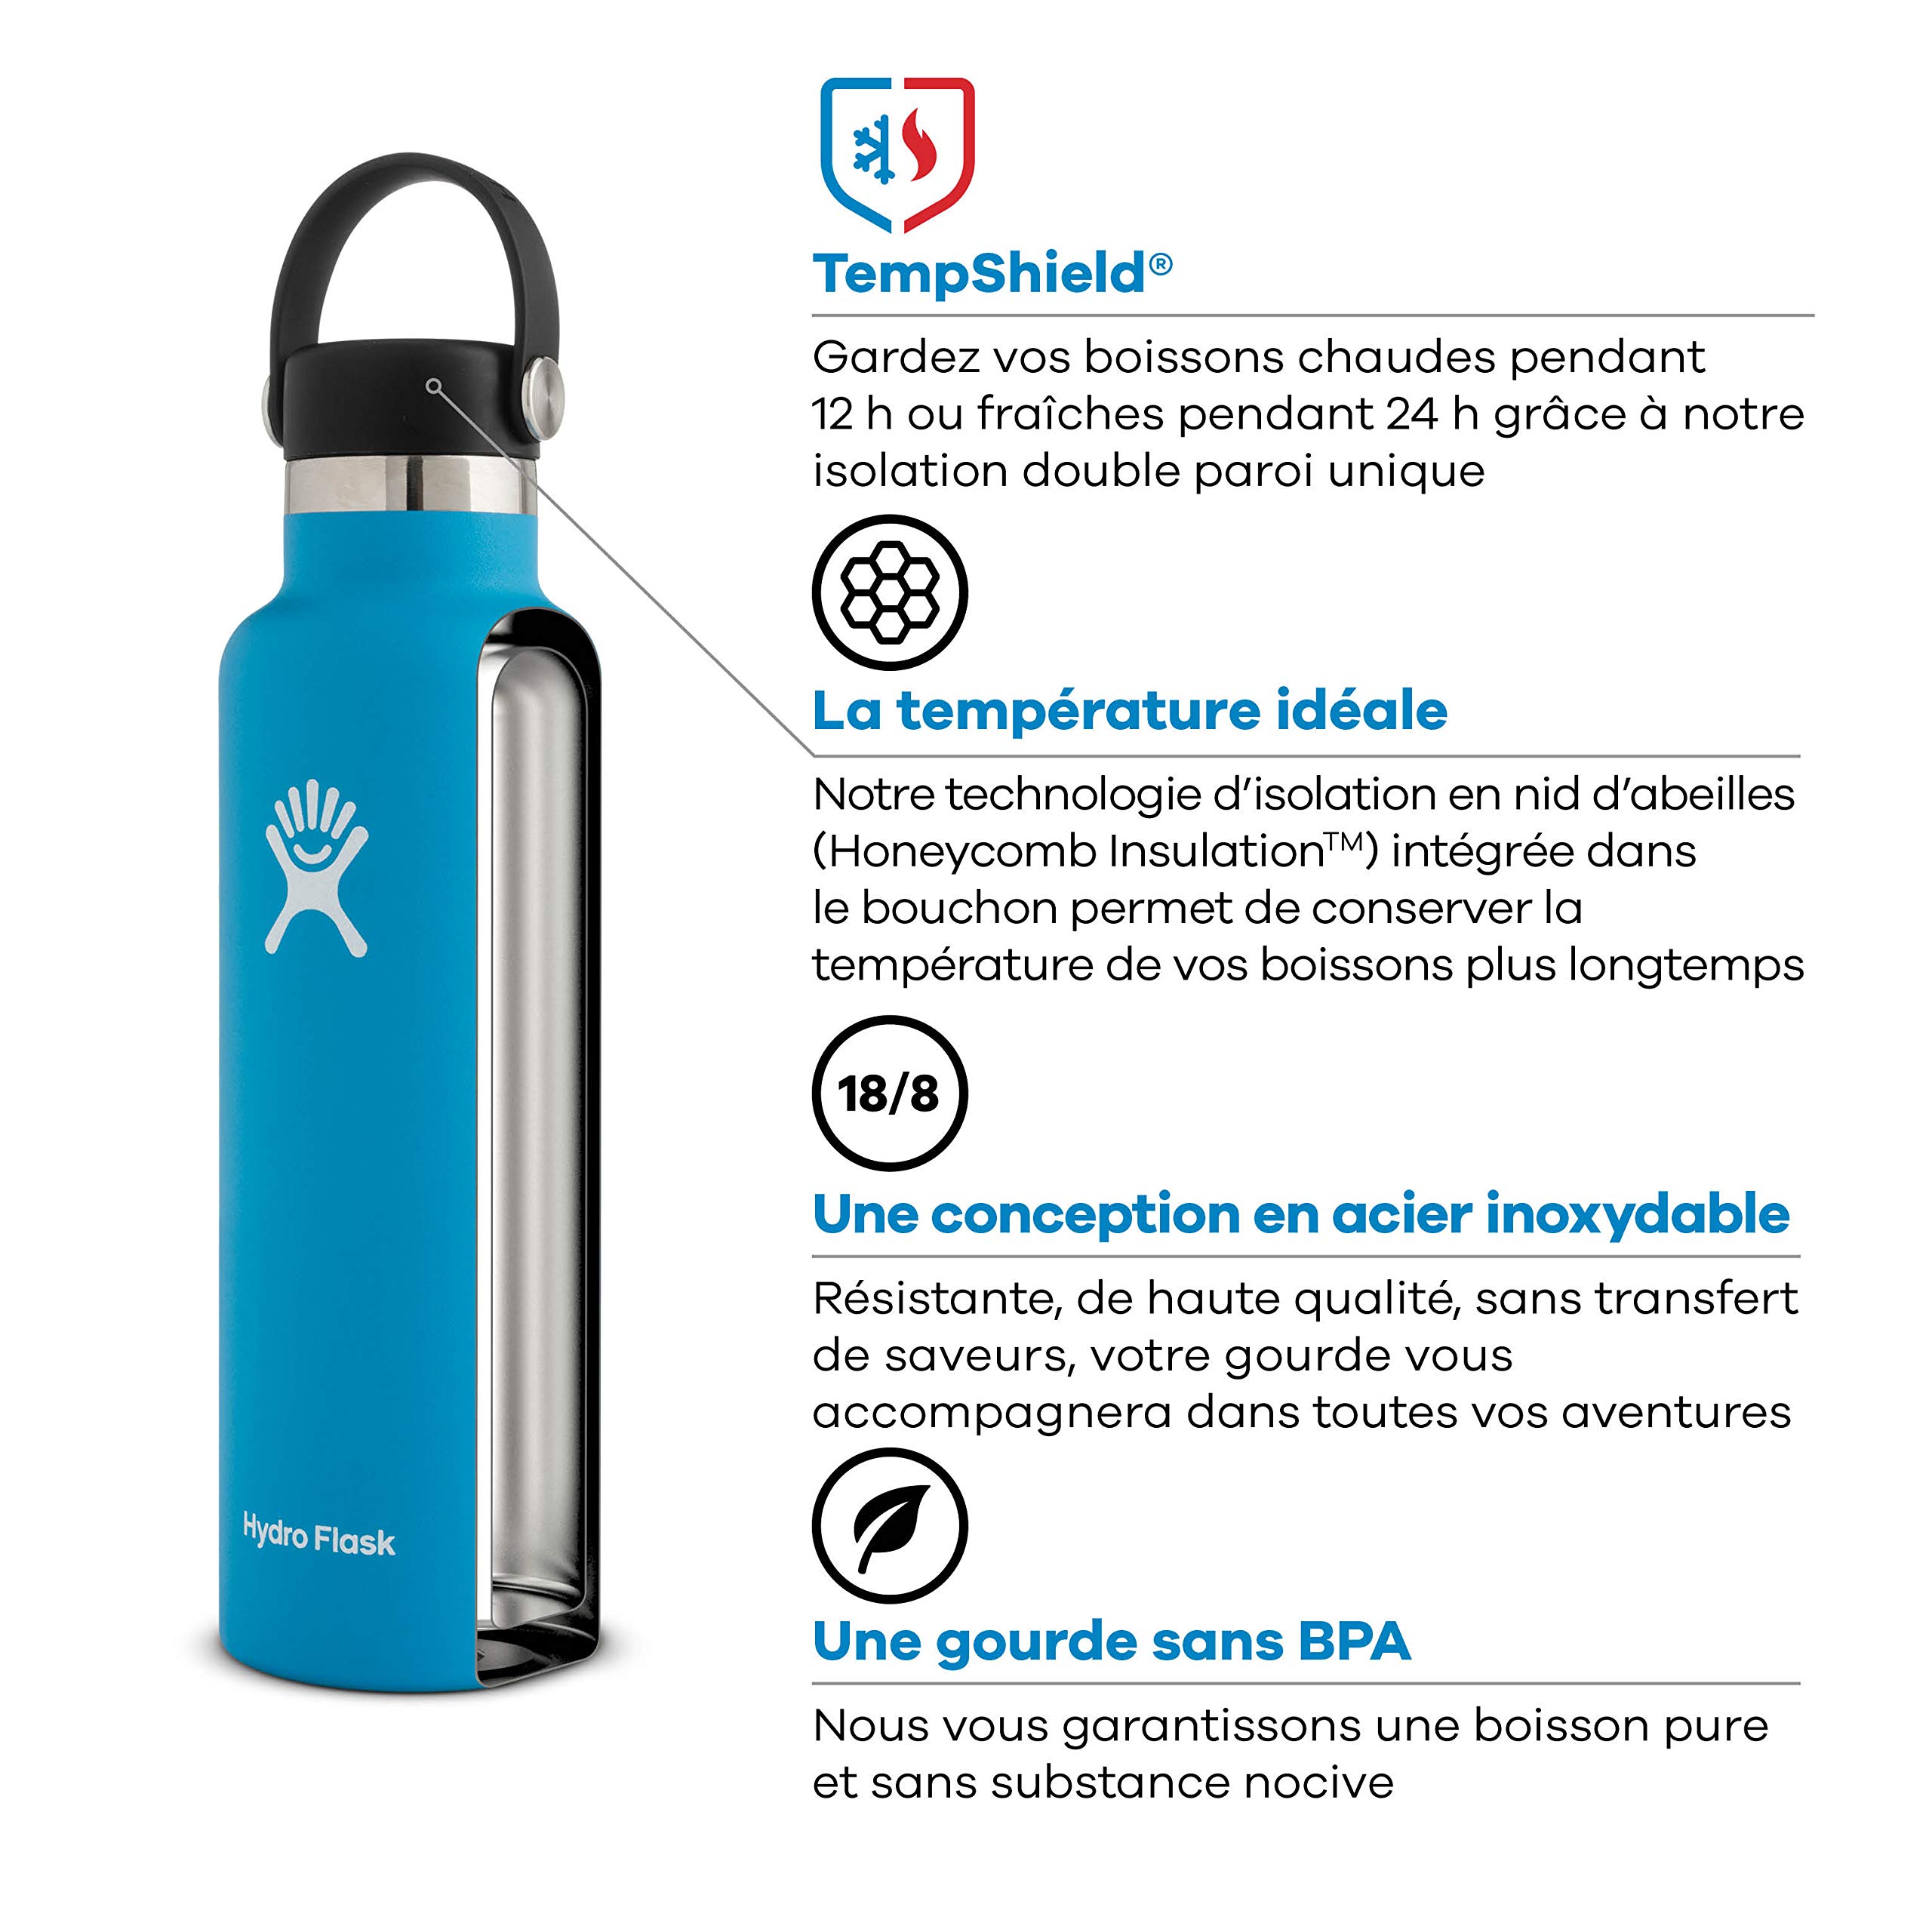 Hydro Flask Standard Mouth Flex Cap Bottle - Stainless Steel Reusable Water Bottle - Vacuum Insulated, Dishwasher Safe, BPA-Free, Non-Toxic